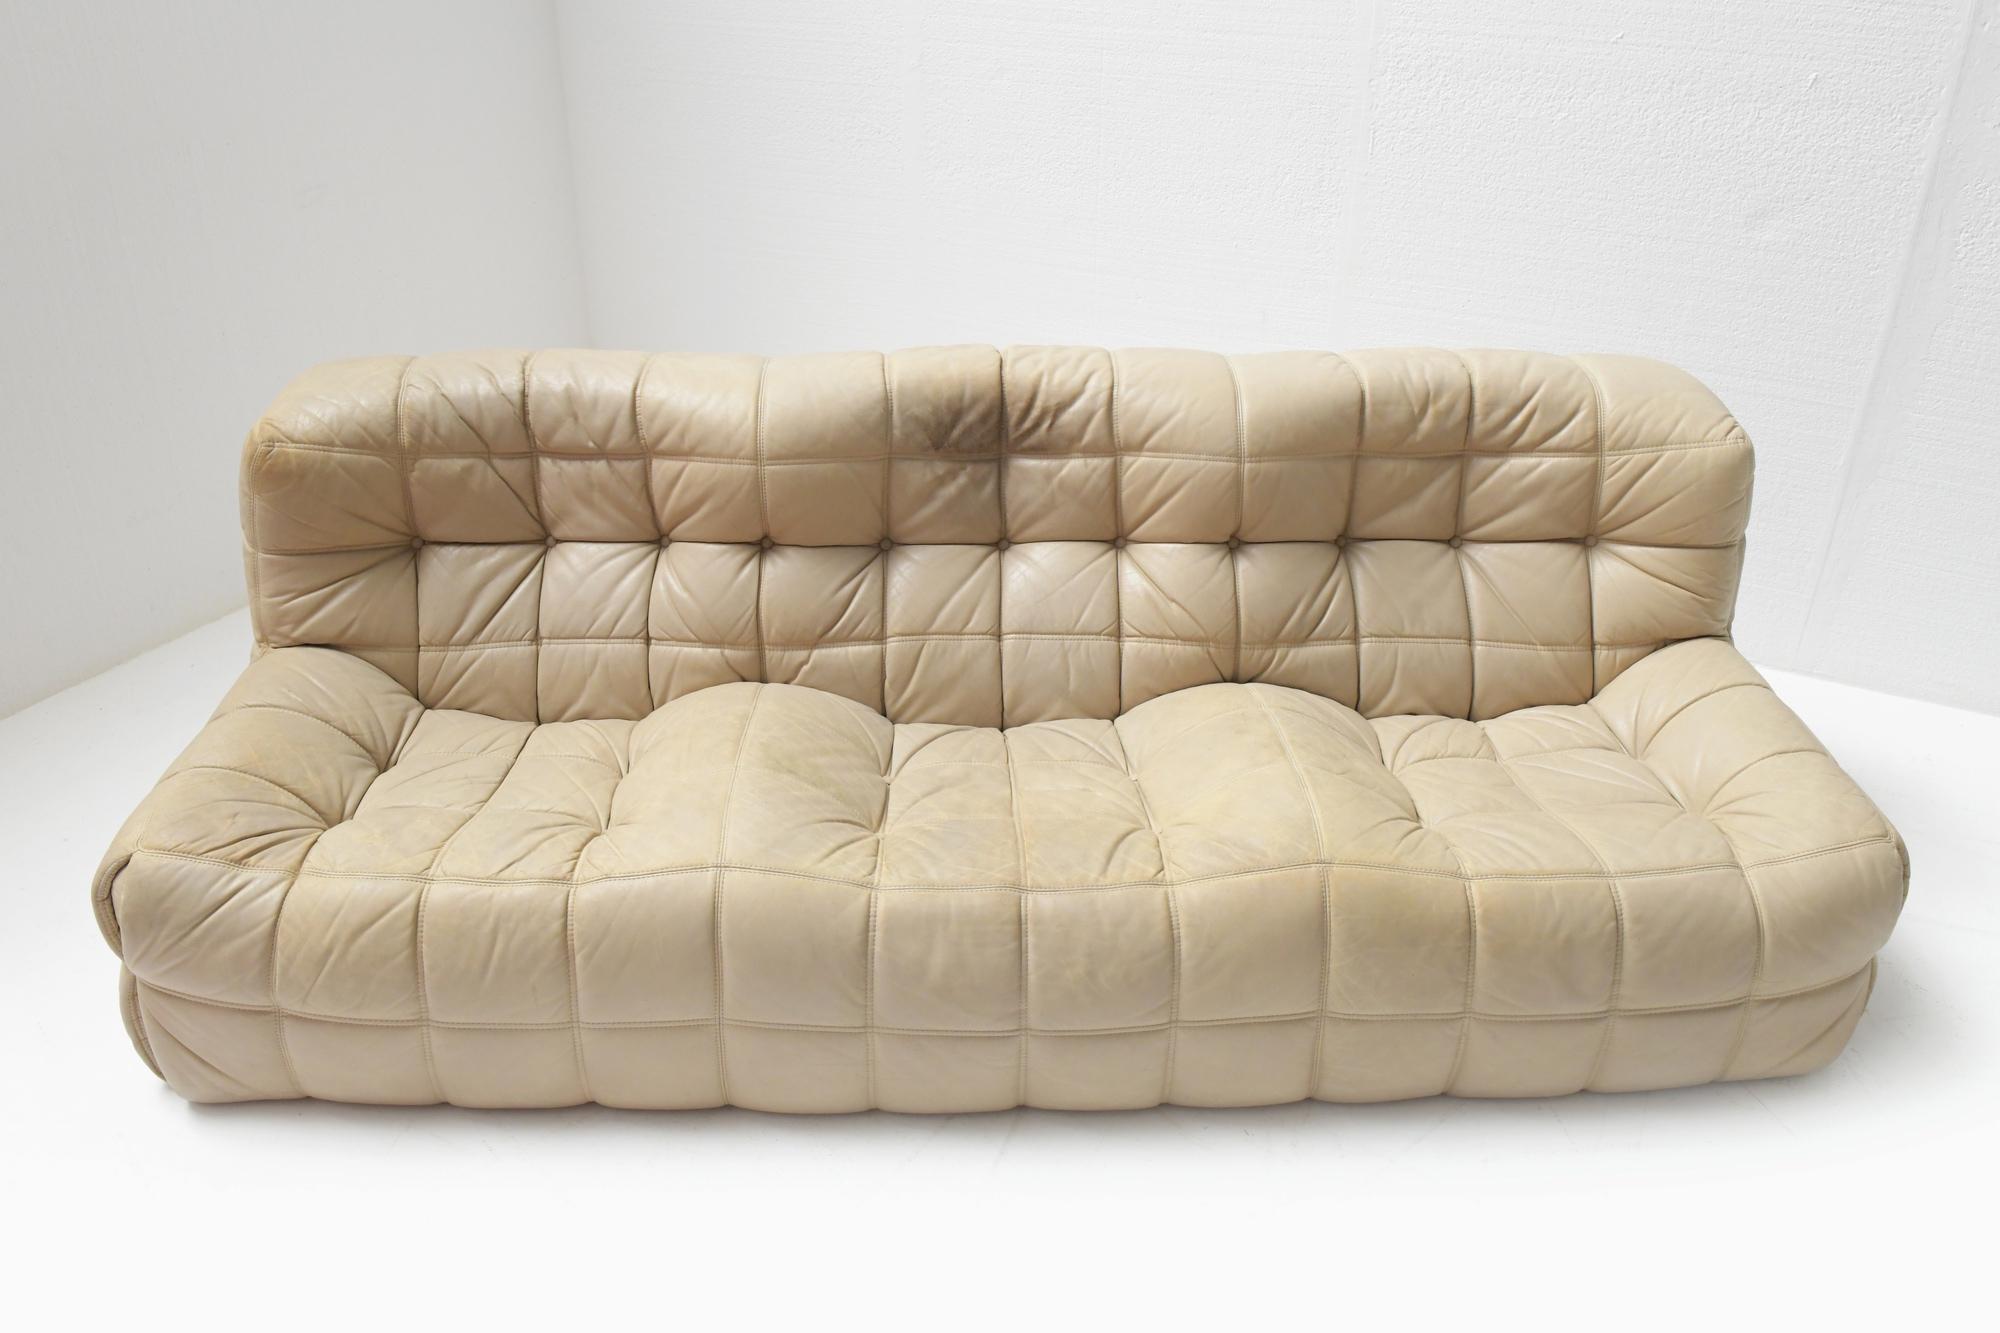 French Vintage Leather Kashima Sofa in Cream Leather by Michel Ducaroy for Ligne Roset